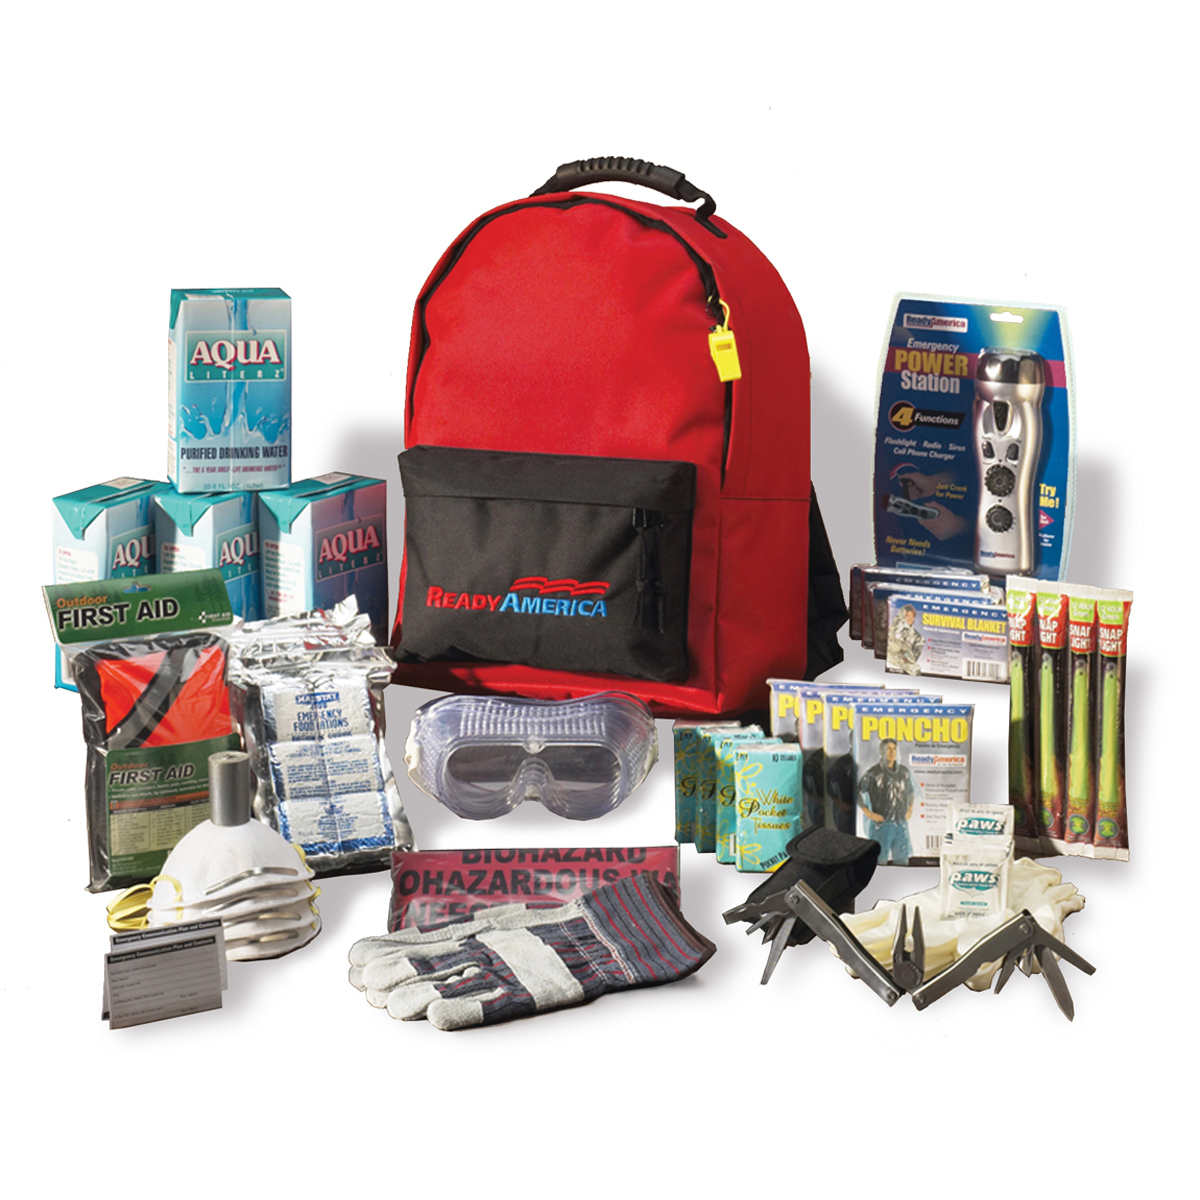 https://aaa.readyamerica.com/wp-content/uploads/2018/05/grab-n-go-3-day-deluxe-emergency-kit-4-person-backpack-3.gif.jpg